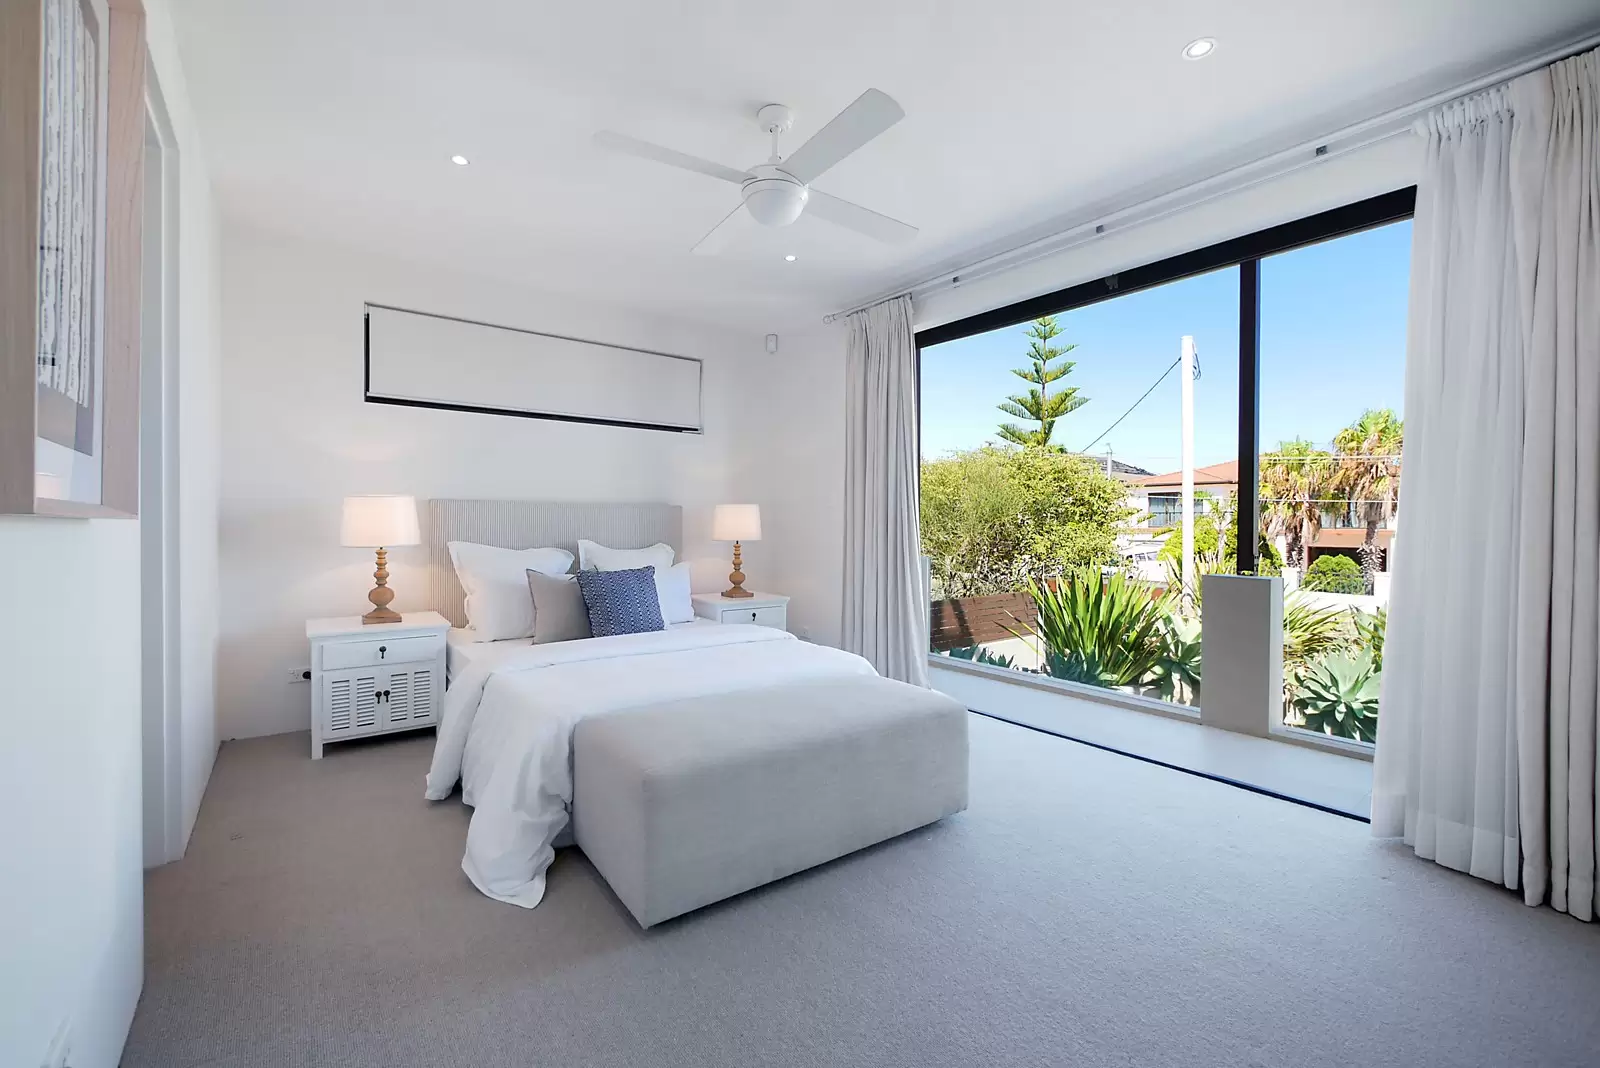 Photo #12: 18a Napier Street, Dover Heights - Sold by Sydney Sotheby's International Realty